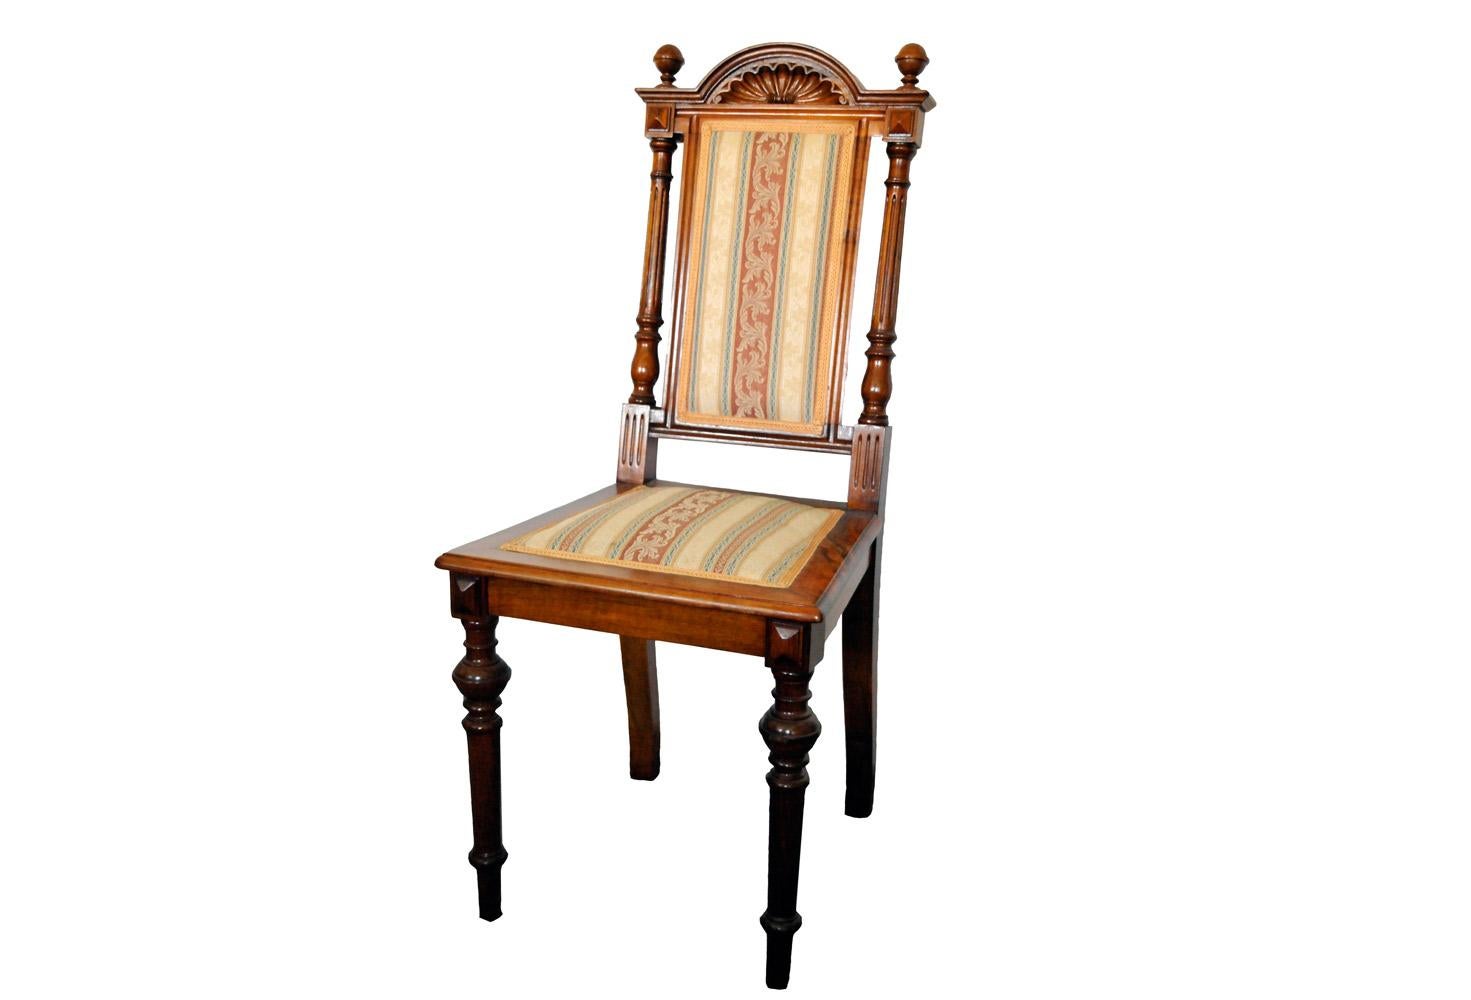 Hungarian Elaborately Carved Chair, circa 1890 For Sale